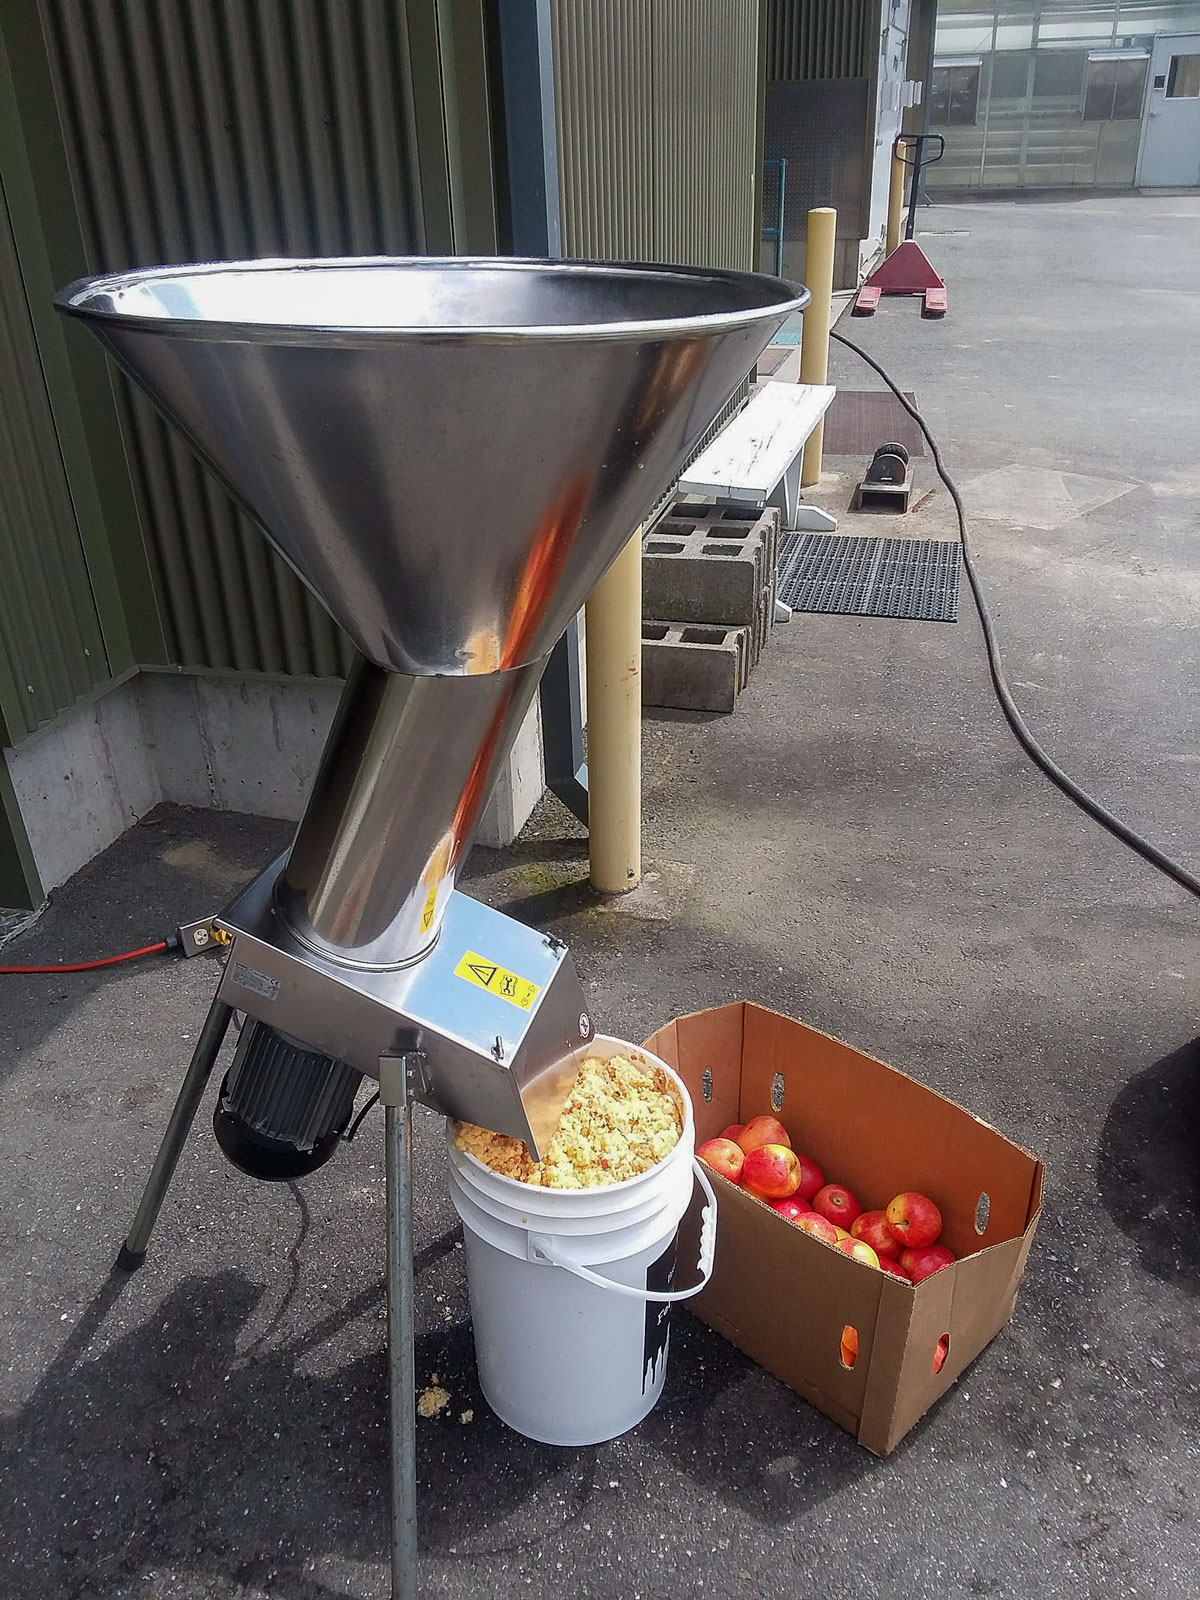 A fruit grinder processes apples at the Sensory Analysis of Fruit Wines and Ciders workshop (August 5, 2017).